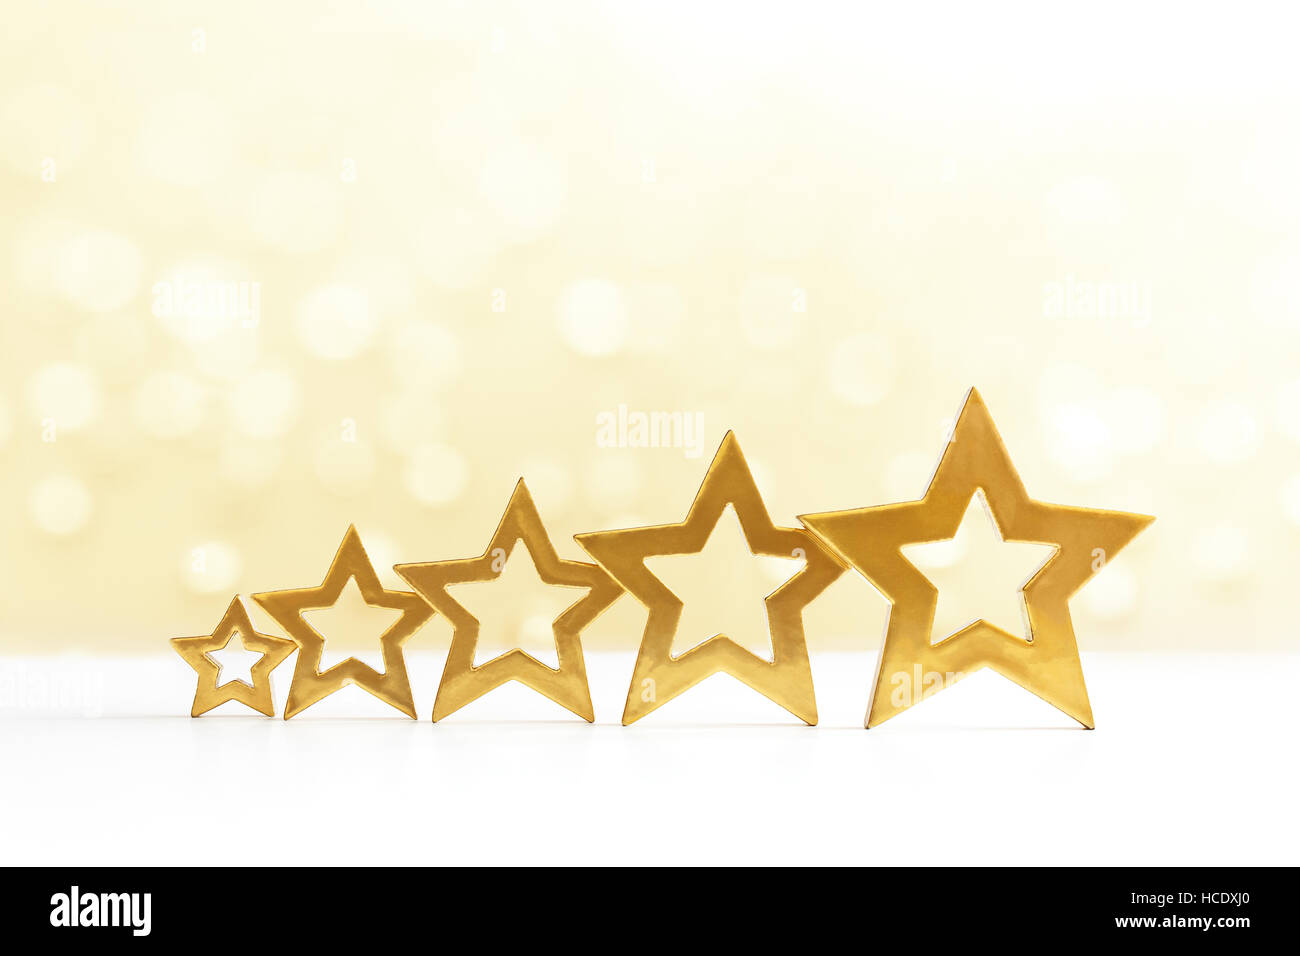 Five golden shining stars in ascending order on white and yellow sparkling background, copy space Stock Photo